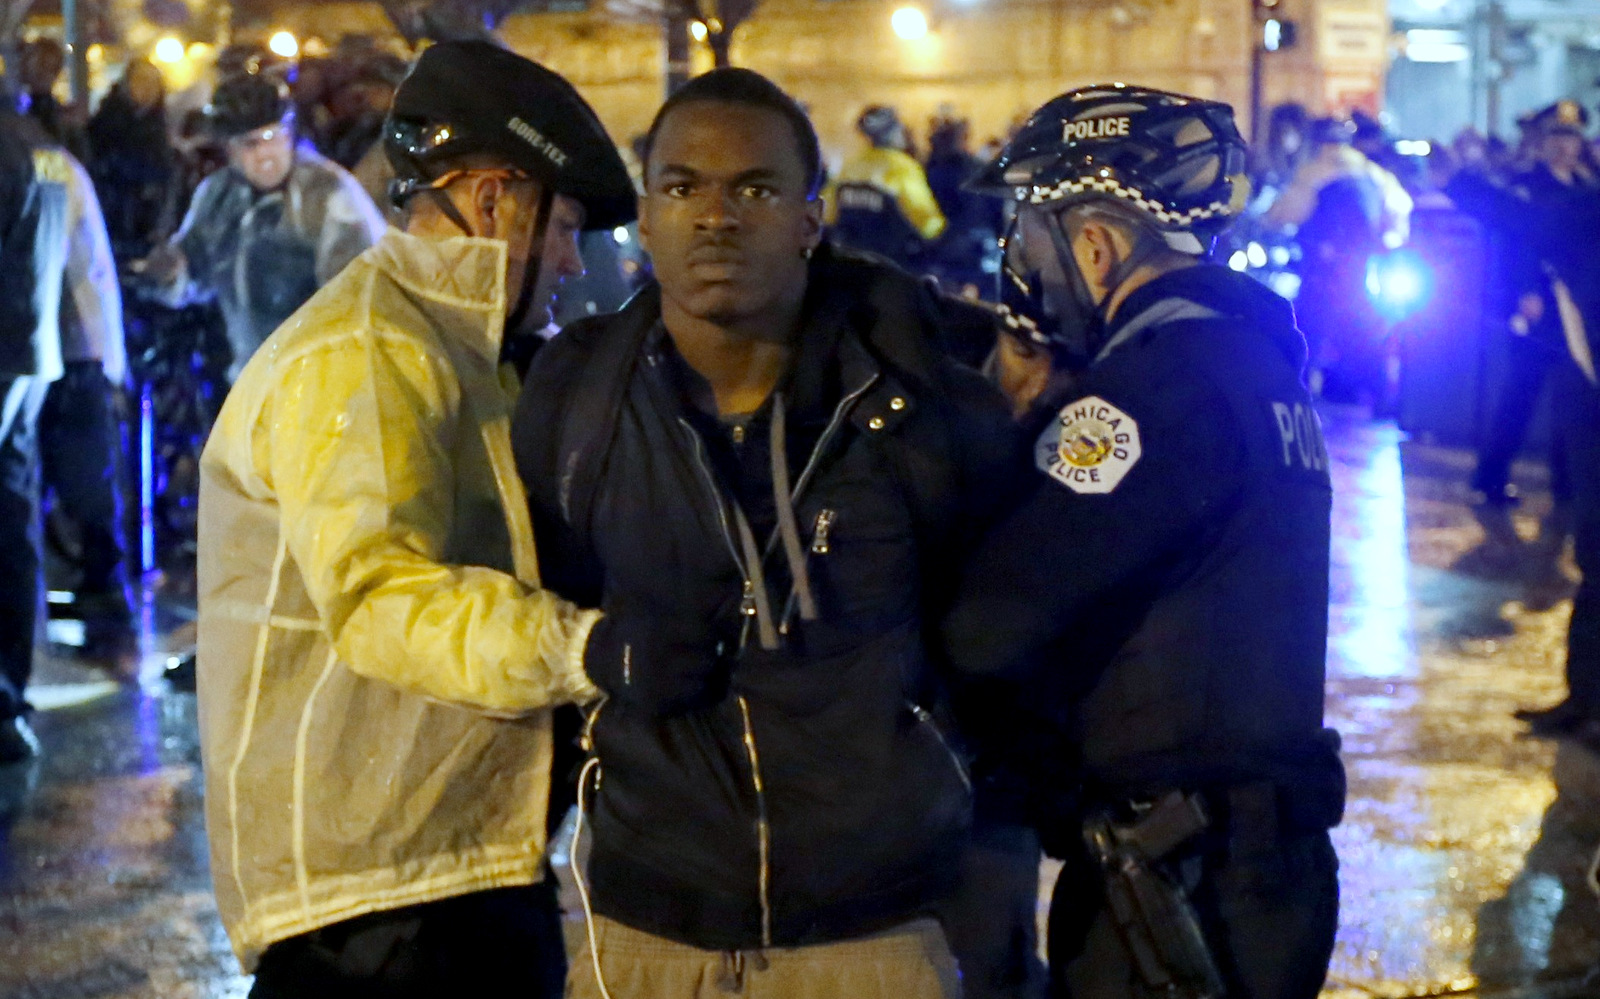 Two Chicago police officers take a man into custody during a protest march, Wednesday, Nov. 25, 2015, in Chicago, the day after murder charges were brought against police officer Jason Van Dyke in the killing of 17-year-old Laquan McDonald. (AP Photo/Charles Rex Arbogast)